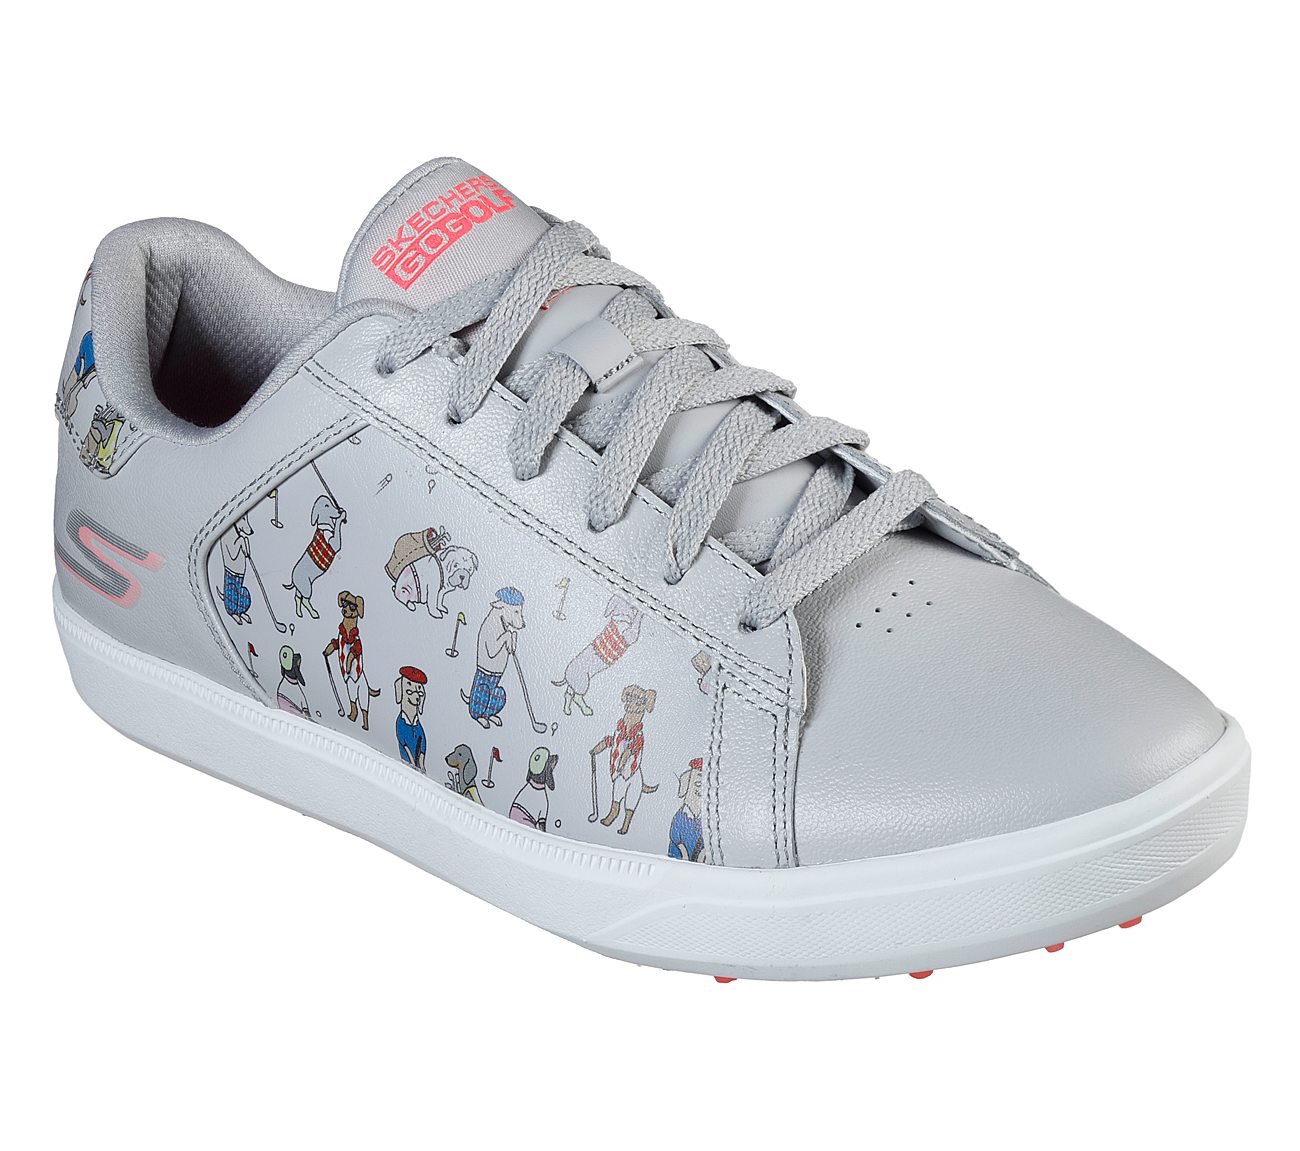 skechers wide fit golf shoes